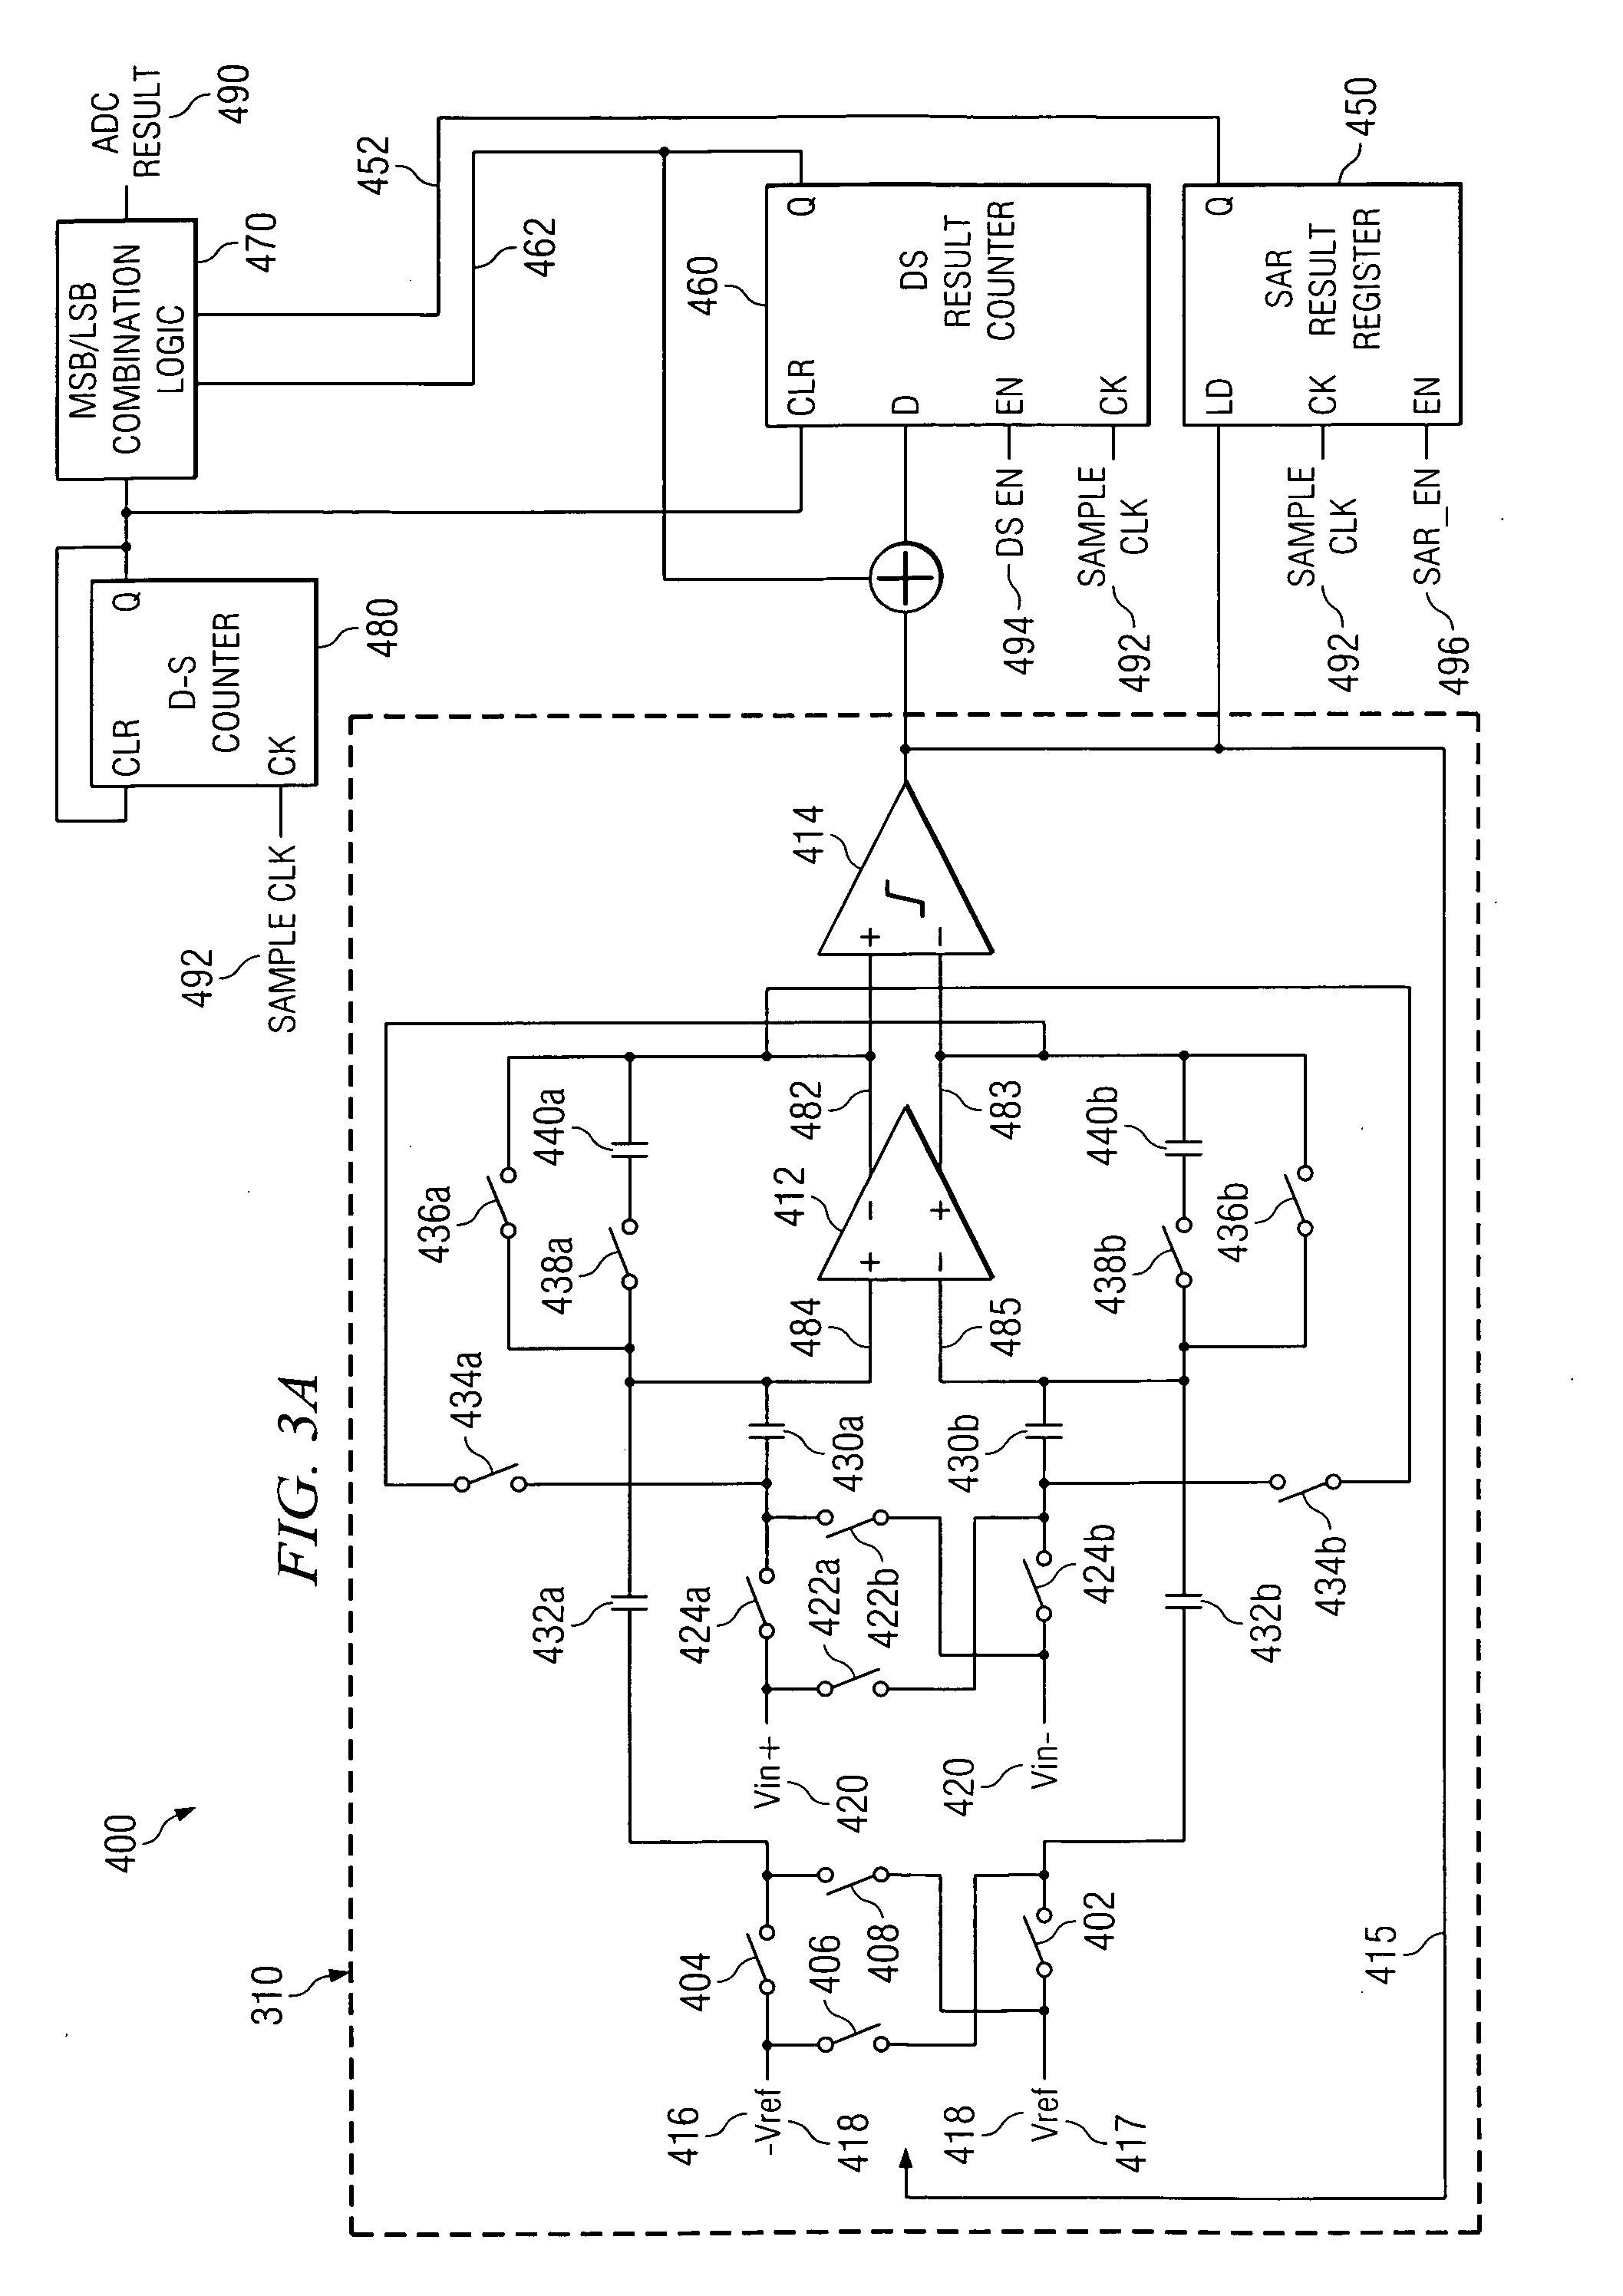 Integrating/SAR ADC and method with low integrator swing and low complexity